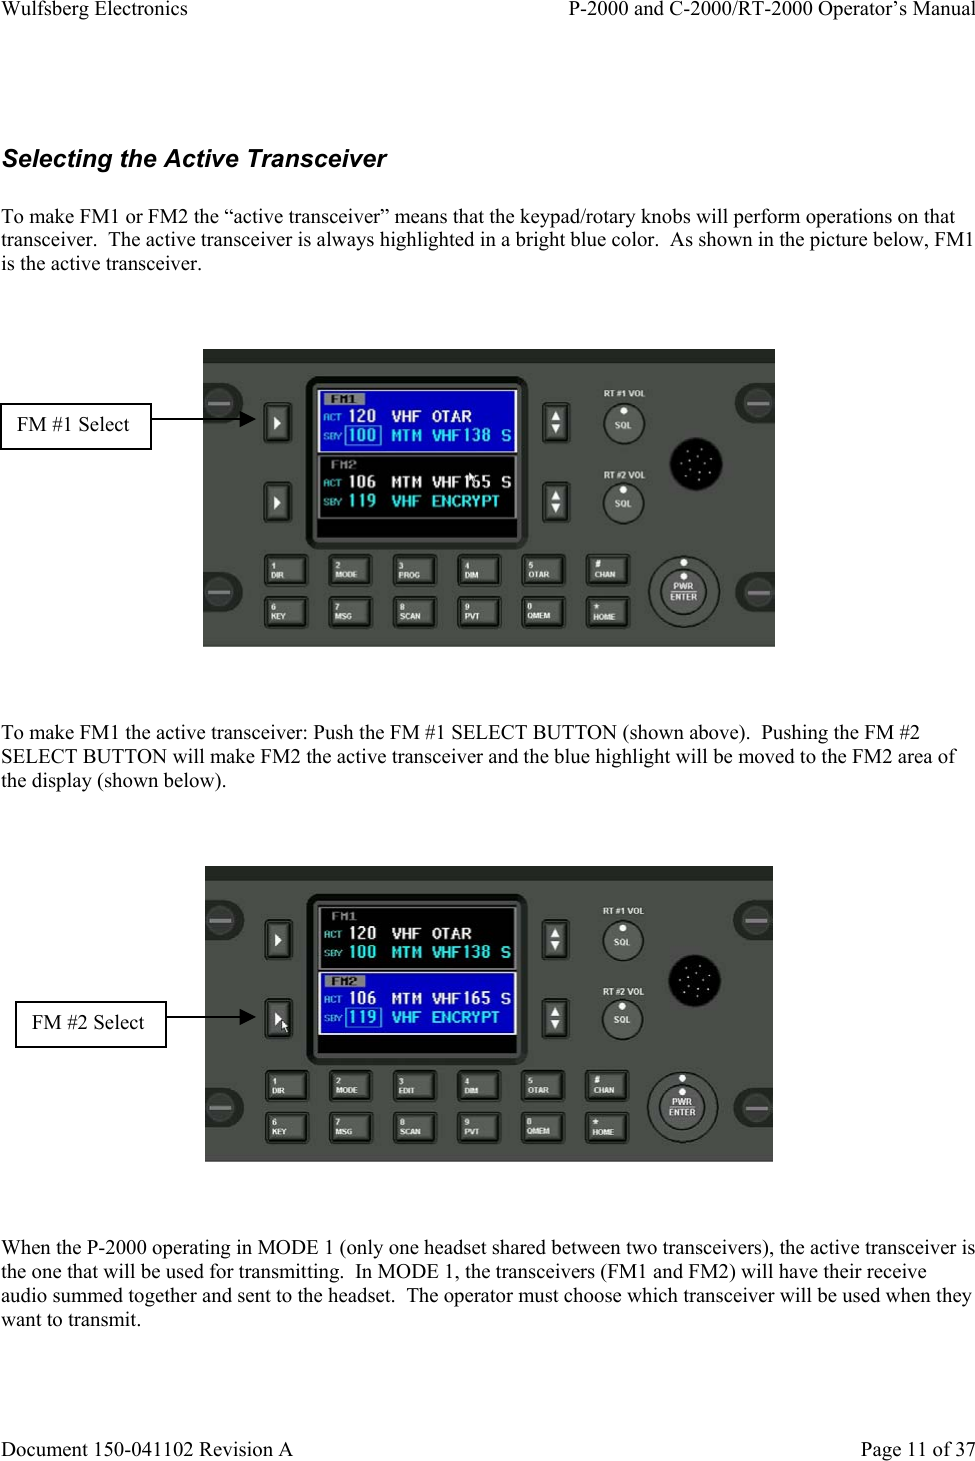 Wulfsberg Electronics P-2000 and C-2000/RT-2000 Operator’s ManualDocument 150-041102 Revision A Page 11 of 37Selecting the Active TransceiverTo make FM1 or FM2 the “active transceiver” means that the keypad/rotary knobs will perform operations on thattransceiver.  The active transceiver is always highlighted in a bright blue color.  As shown in the picture below, FM1is the active transceiver.To make FM1 the active transceiver: Push the FM #1 SELECT BUTTON (shown above).  Pushing the FM #2SELECT BUTTON will make FM2 the active transceiver and the blue highlight will be moved to the FM2 area ofthe display (shown below).When the P-2000 operating in MODE 1 (only one headset shared between two transceivers), the active transceiver isthe one that will be used for transmitting.  In MODE 1, the transceivers (FM1 and FM2) will have their receiveaudio summed together and sent to the headset.  The operator must choose which transceiver will be used when theywant to transmit.FM #2 SelectFM #1 Select